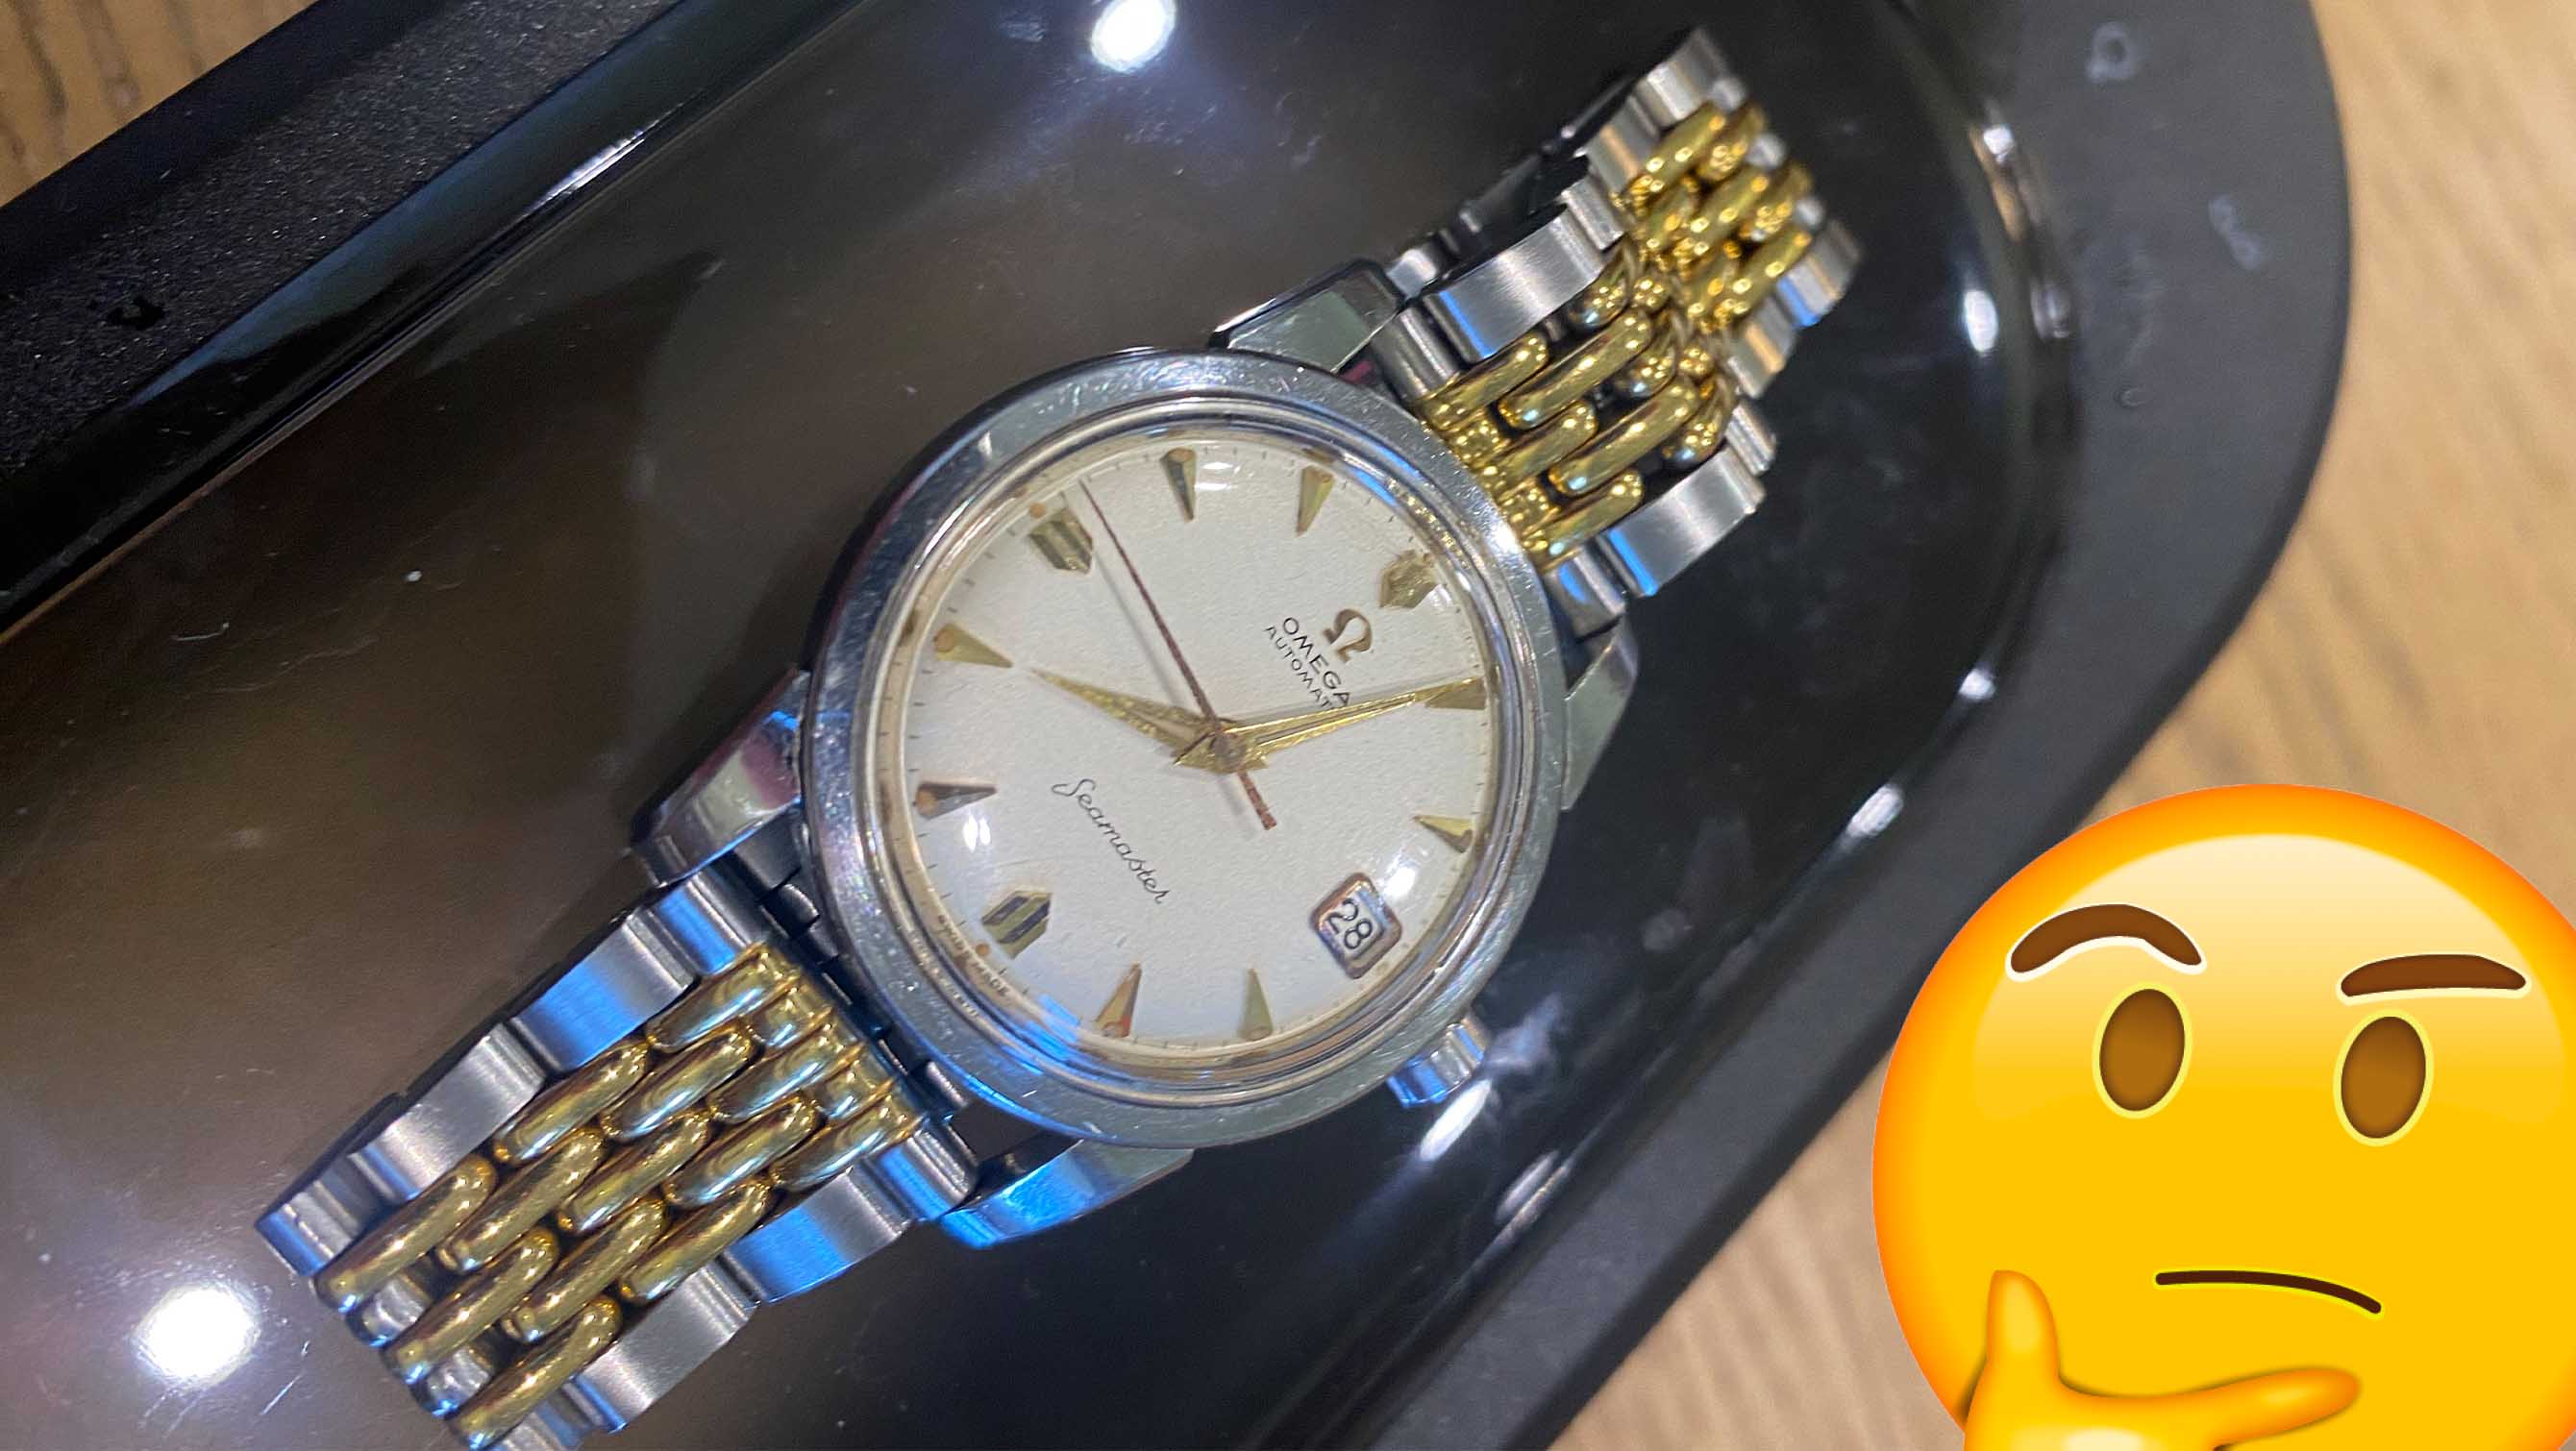 Can I use an ultrasonic cleaner on my watch?